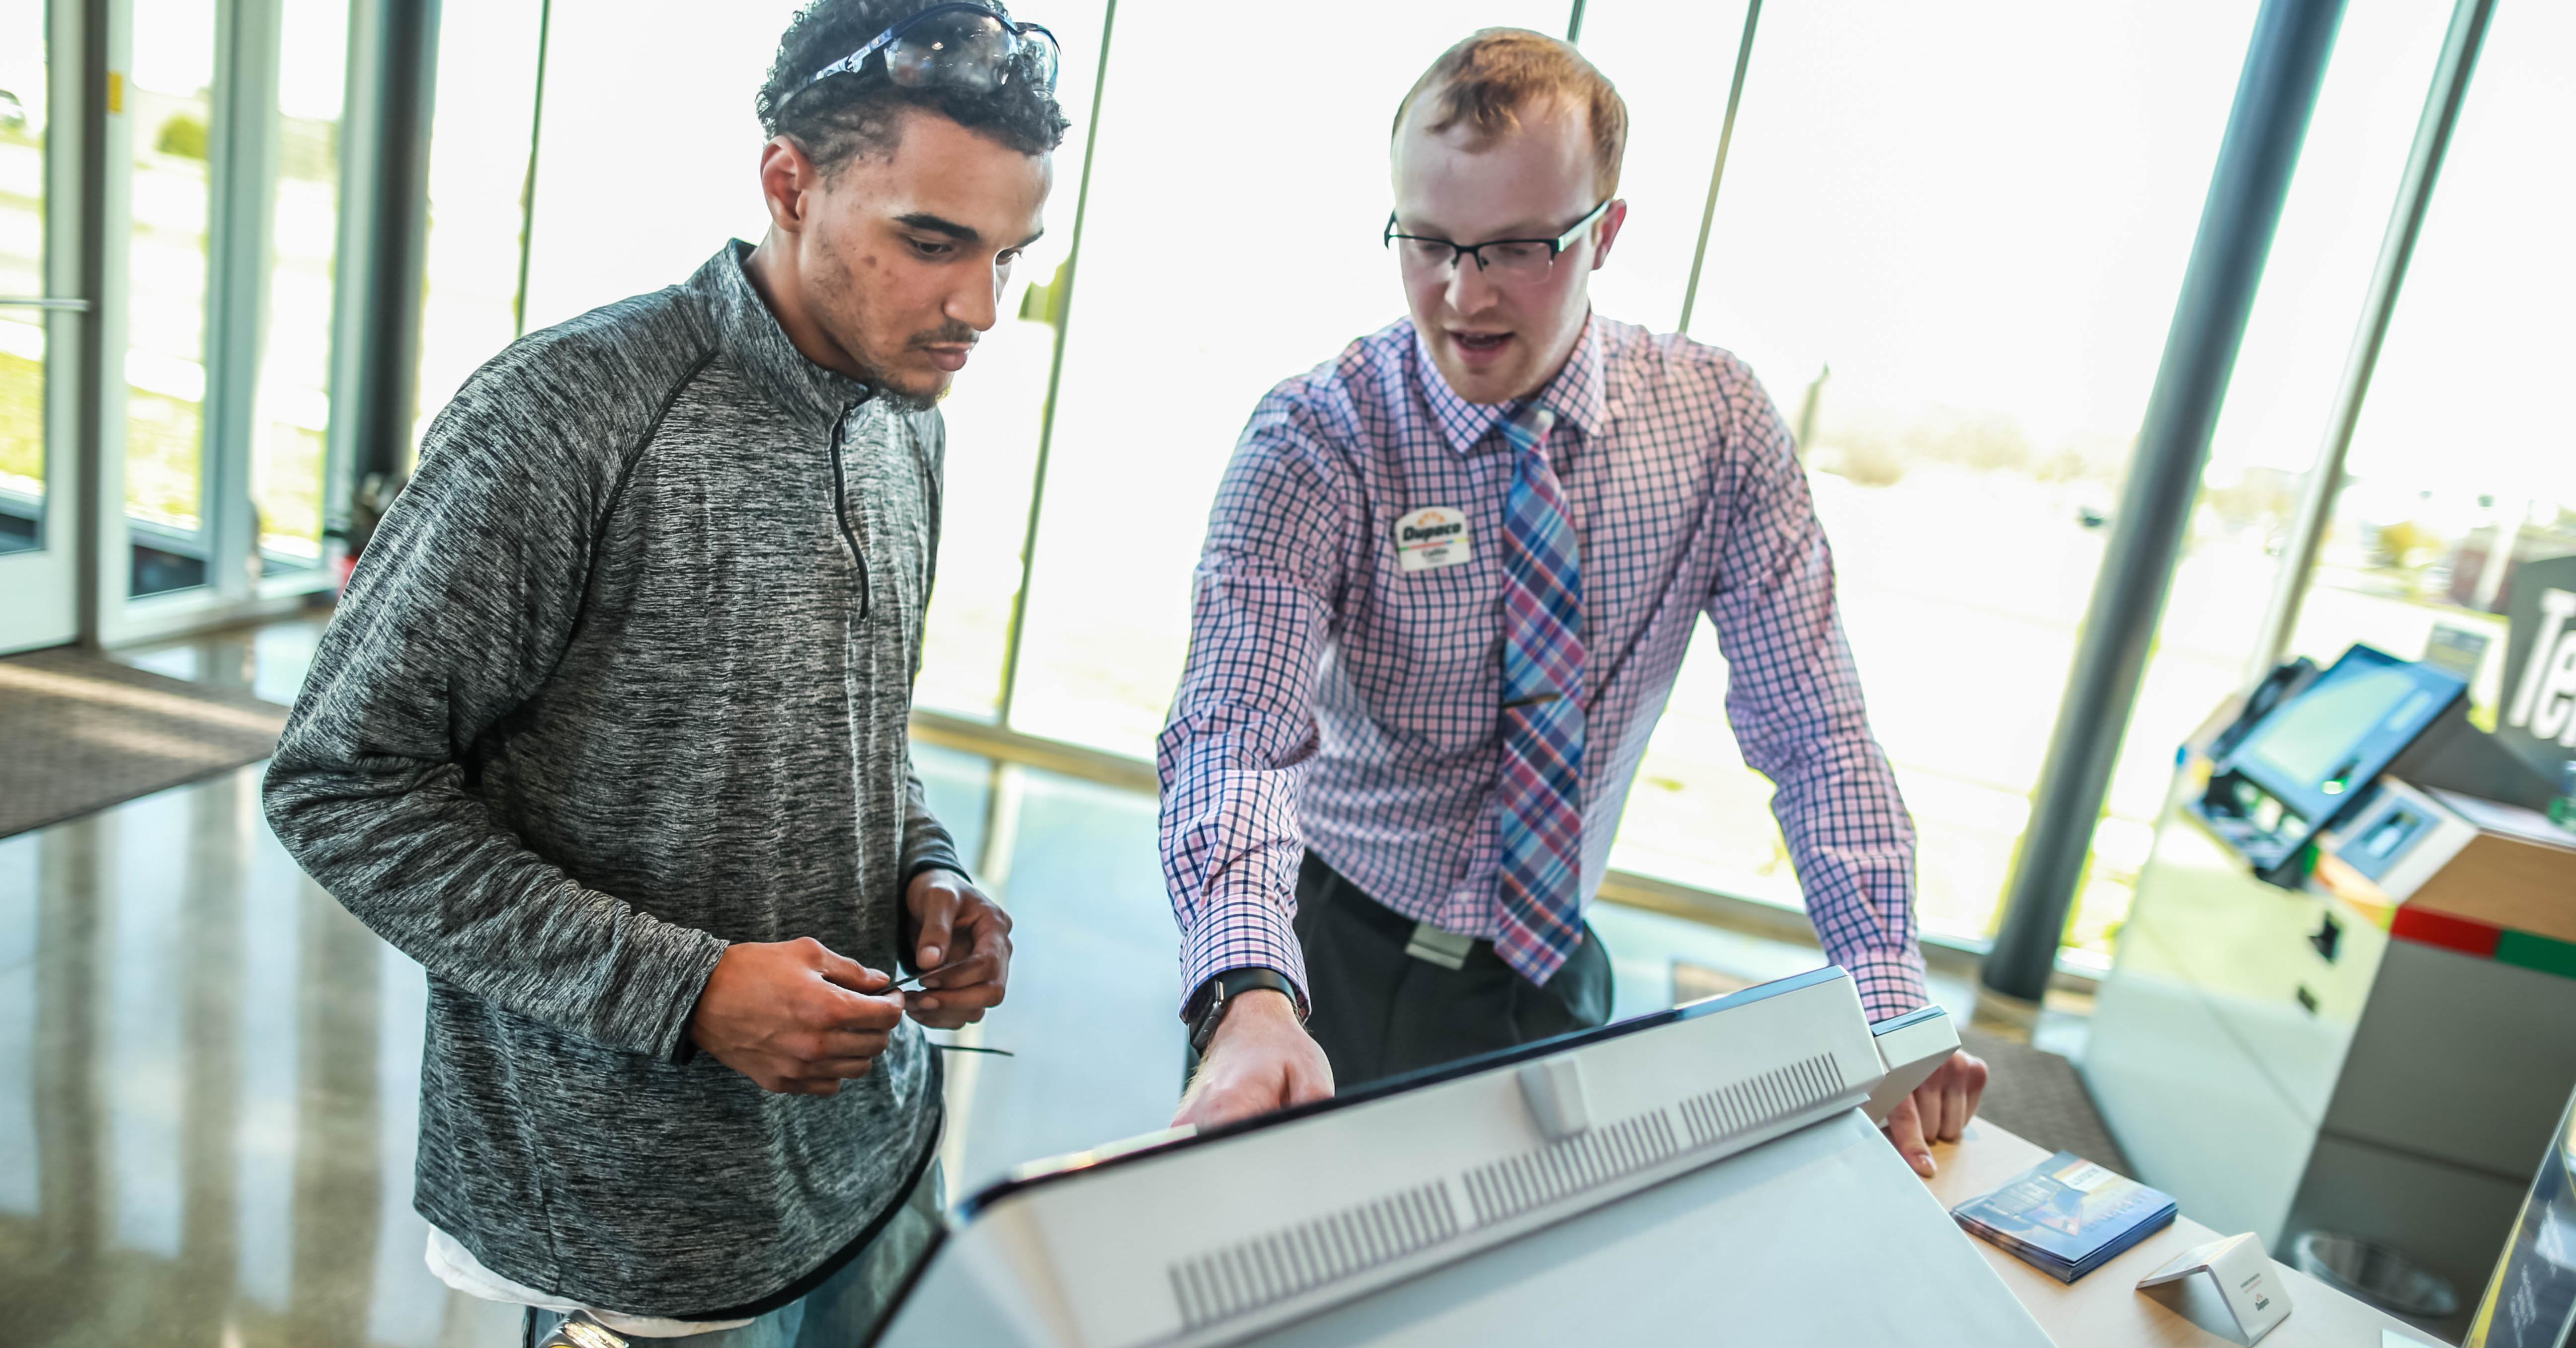 Shortly after the opening of the San Marnan Learning Lab in Waterloo, Iowa, Dupaco member Donovan Miles (left) uses the Interactive Teller Machine with the help of Dupaco’s Collin Olson. (G. Brown photo)